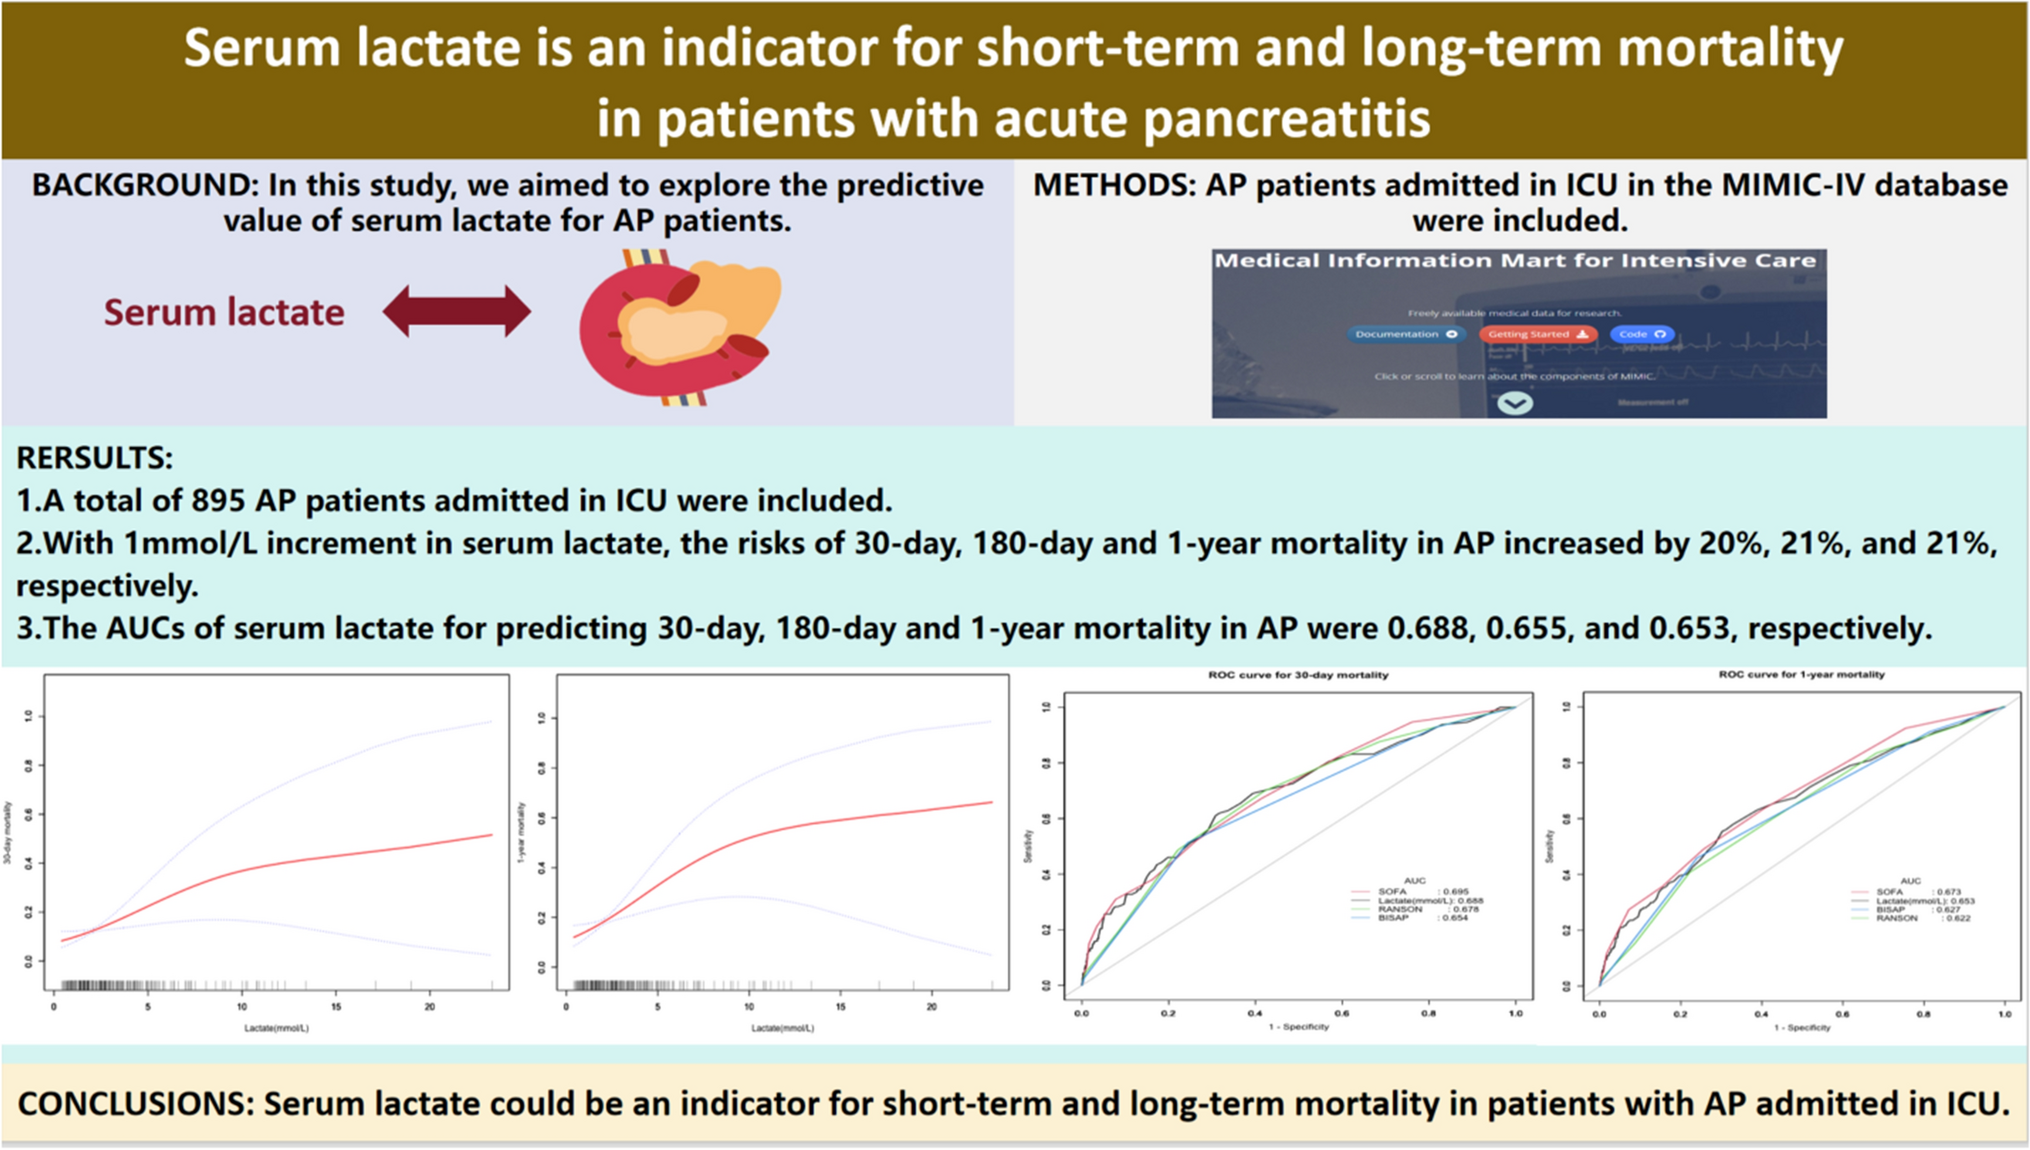 Serum Lactate Is an Indicator for Short-Term and Long-Term Mortality in Patients with Acute Pancreatitis